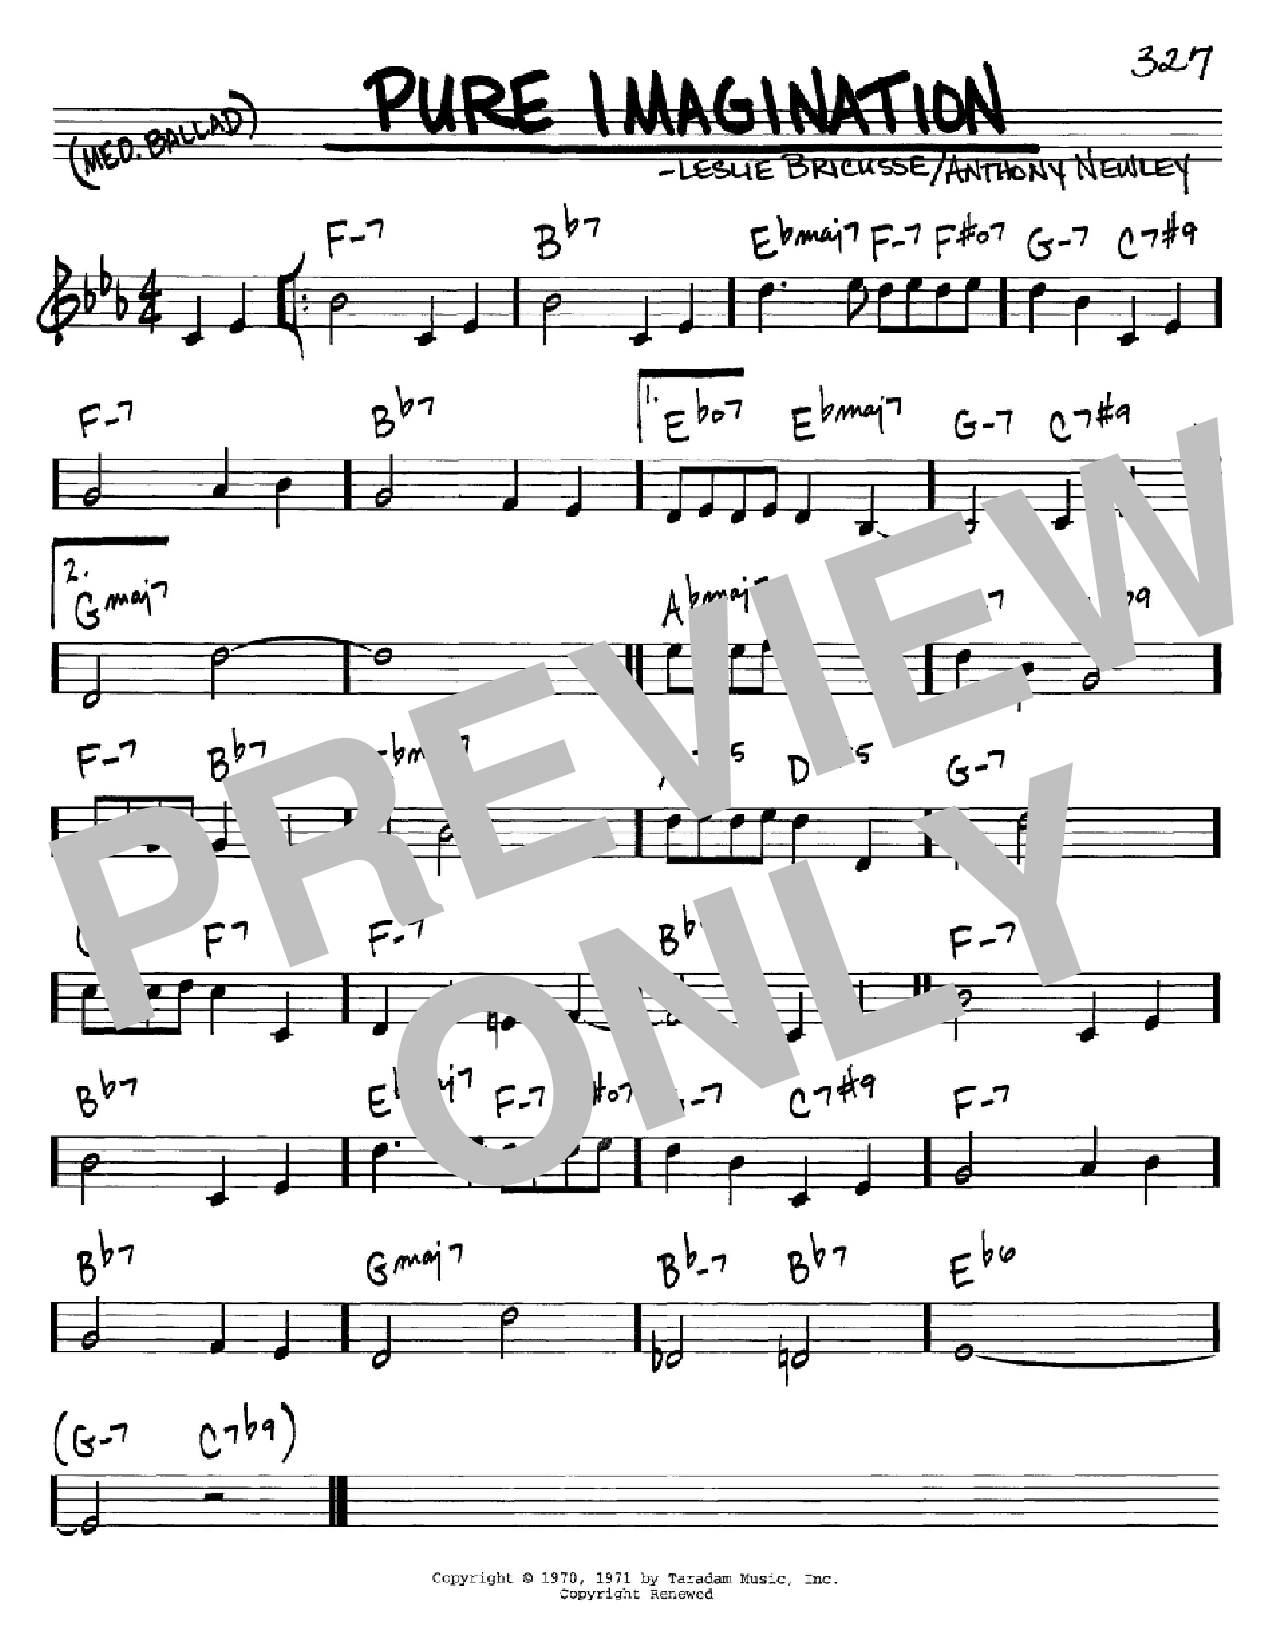 Download Willy Wonka & the Chocolate Factory Pure Imagination Sheet Music